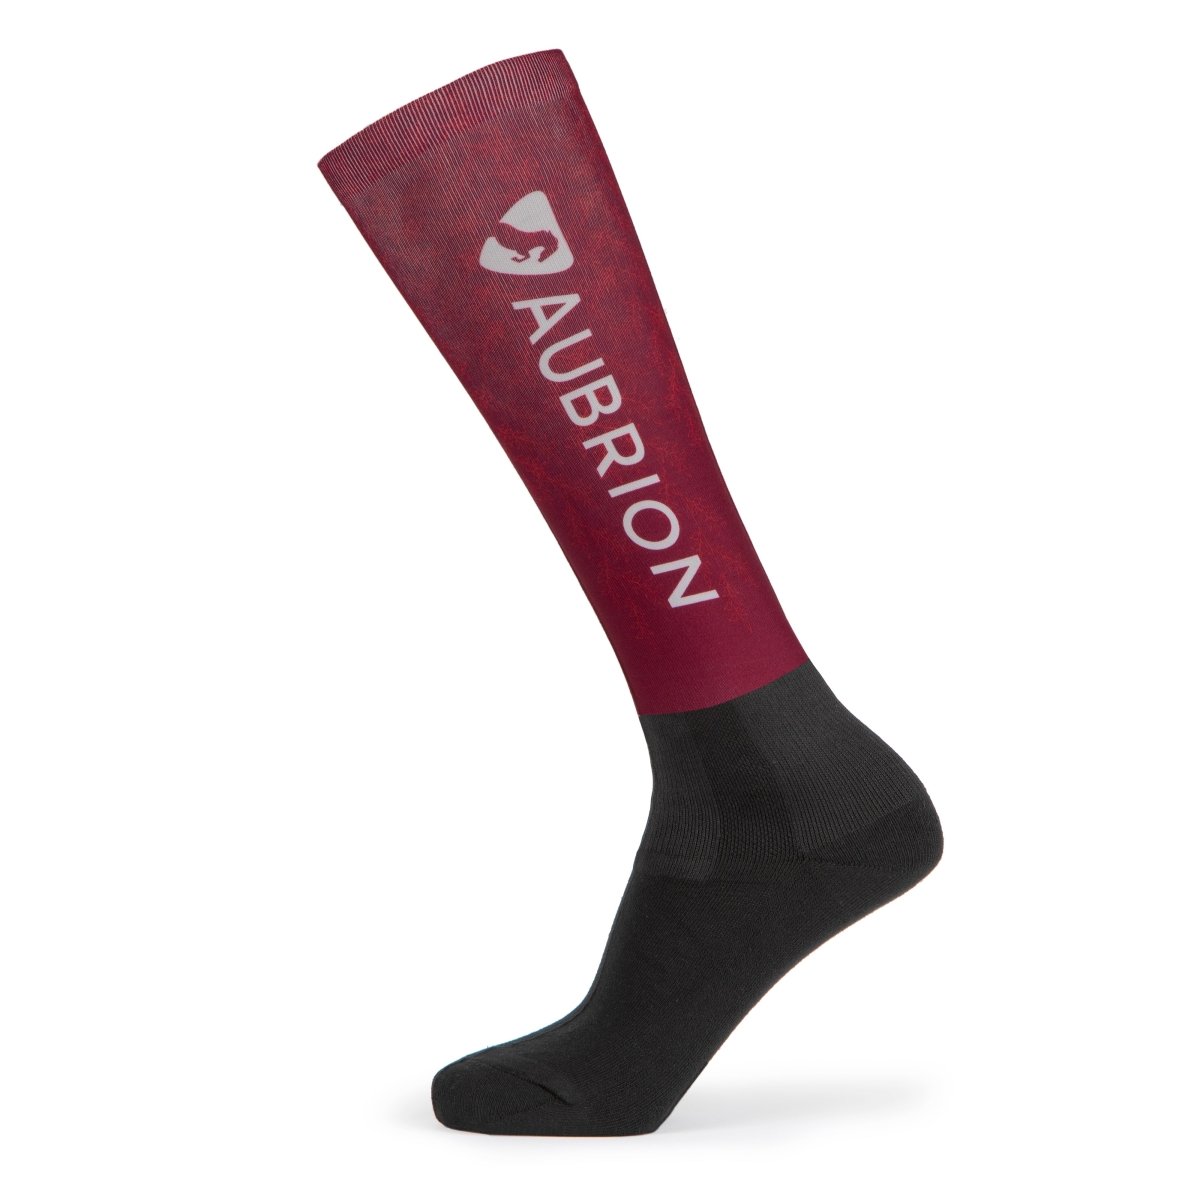 Aubrion Hyde Park Cross Country Socks - Red Leaf -